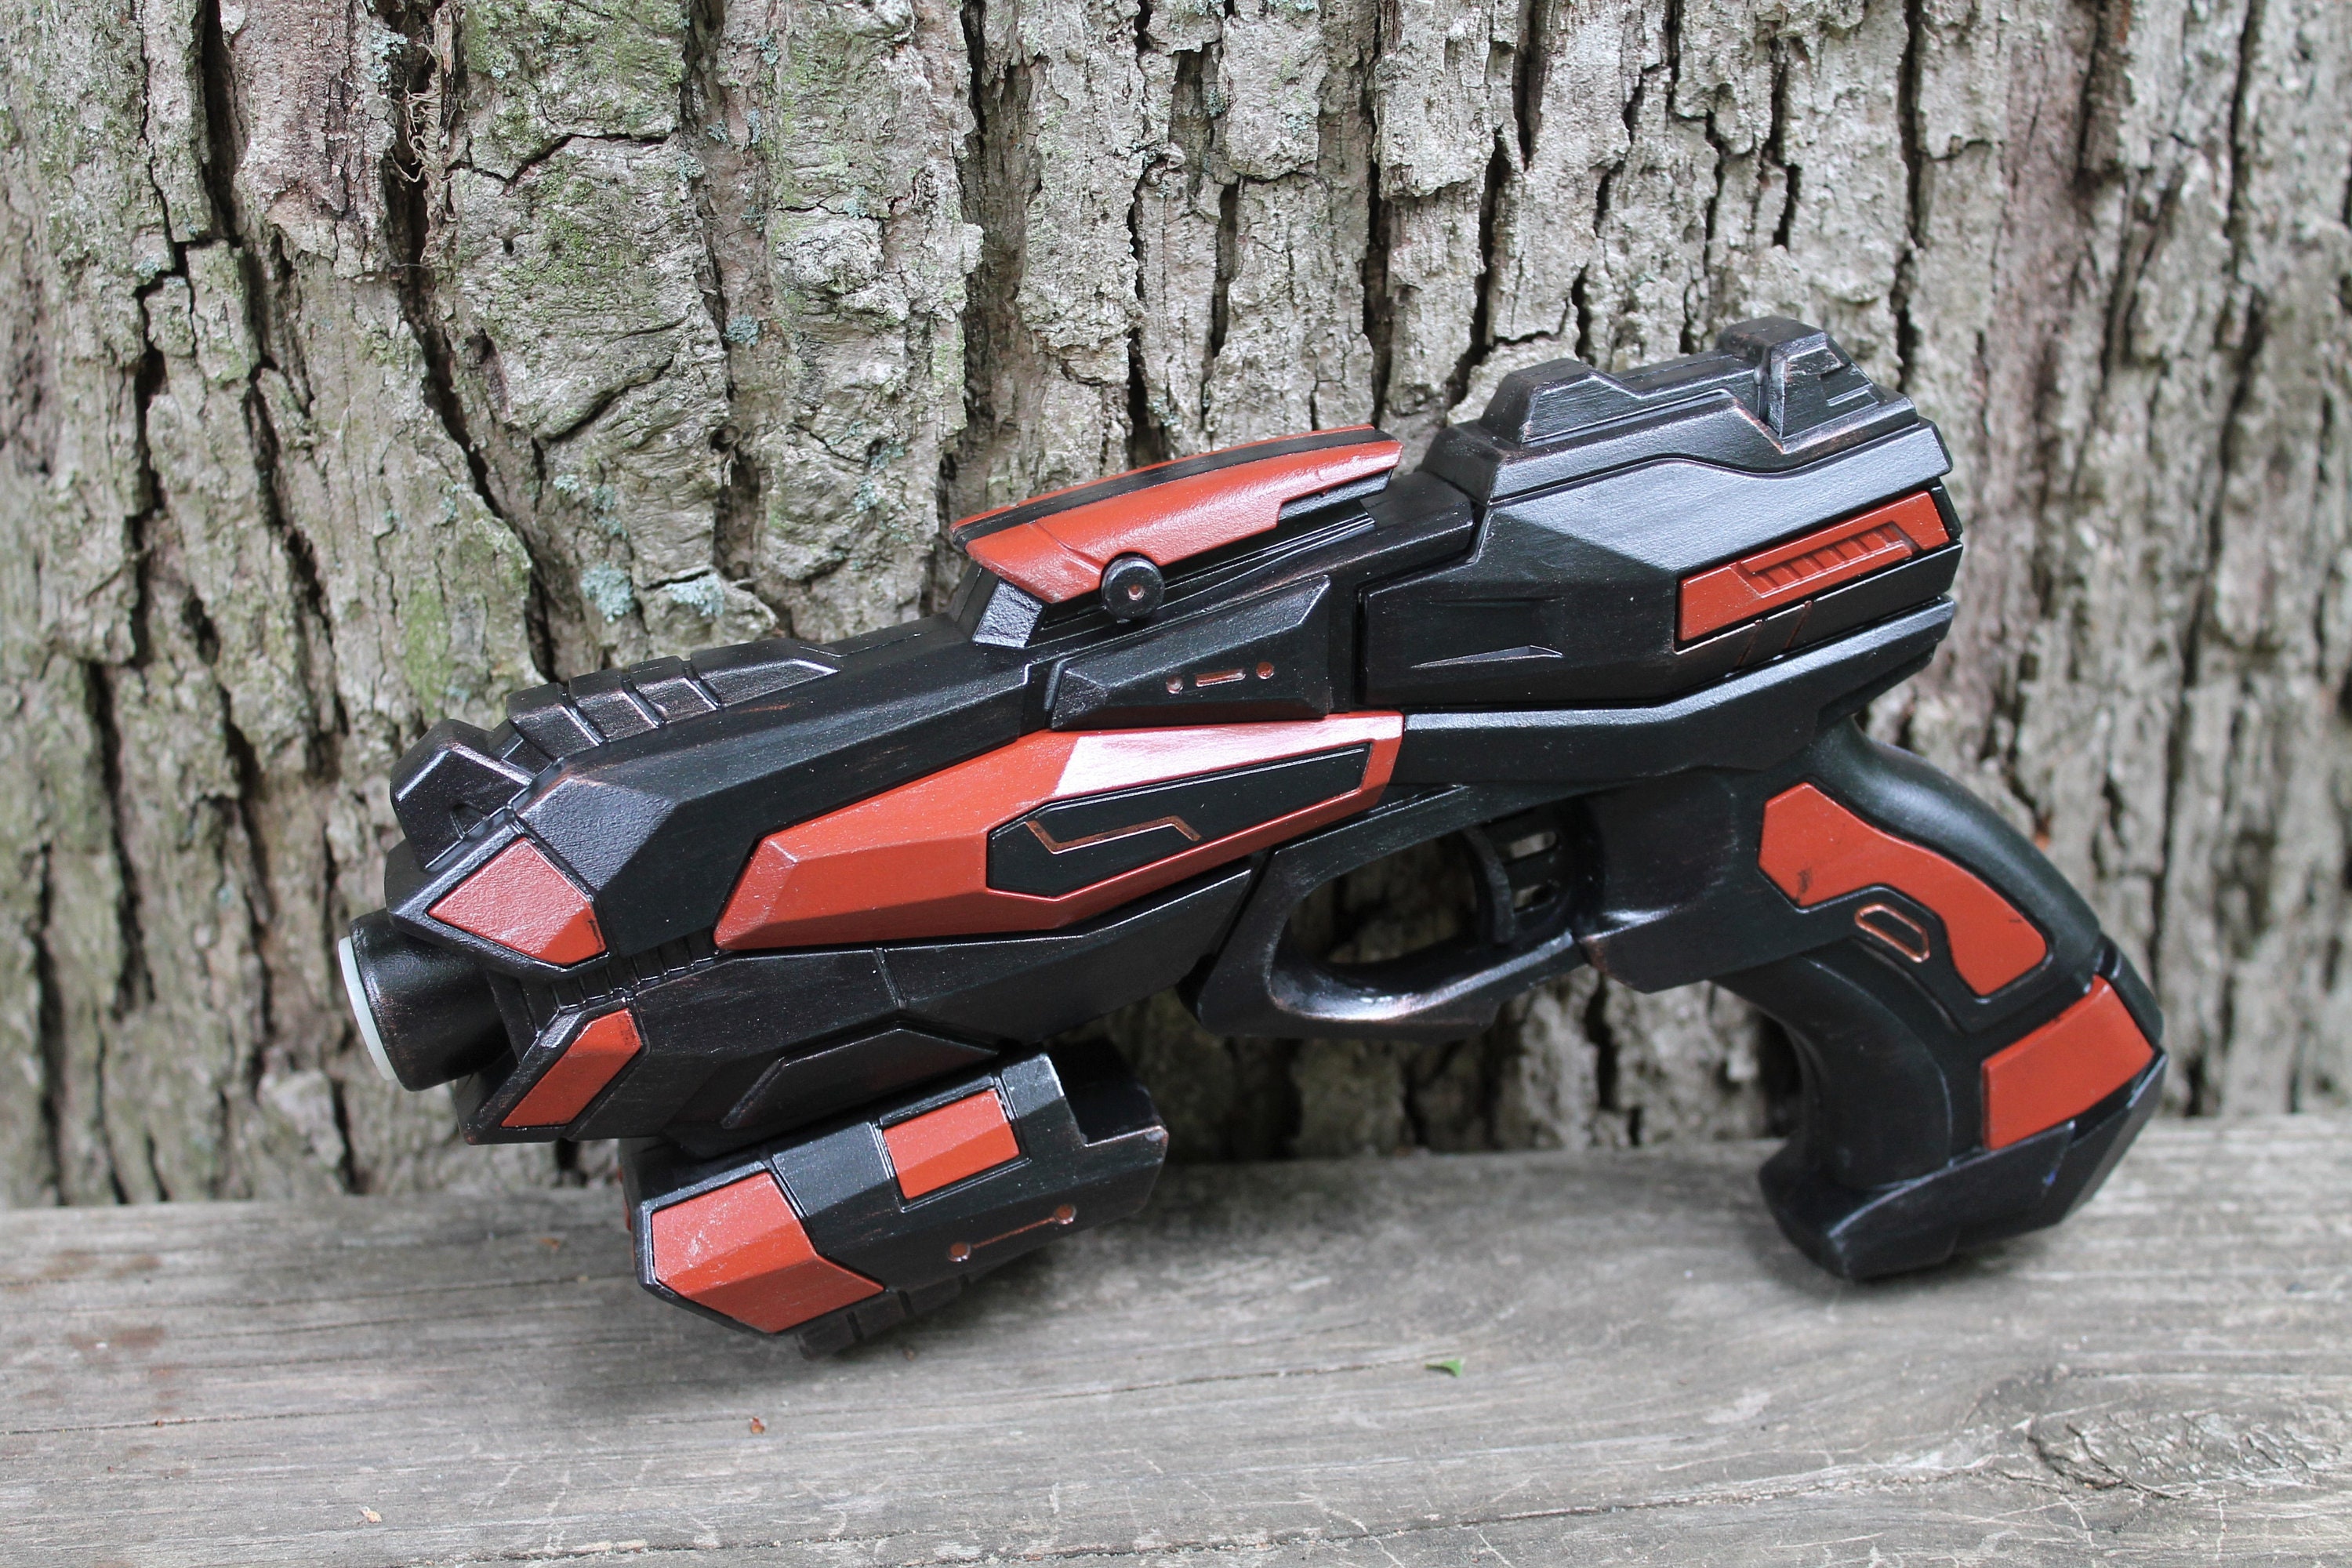 Custom Painted Nerf Style Foam Blaster. From The Sands - Etsy 日本